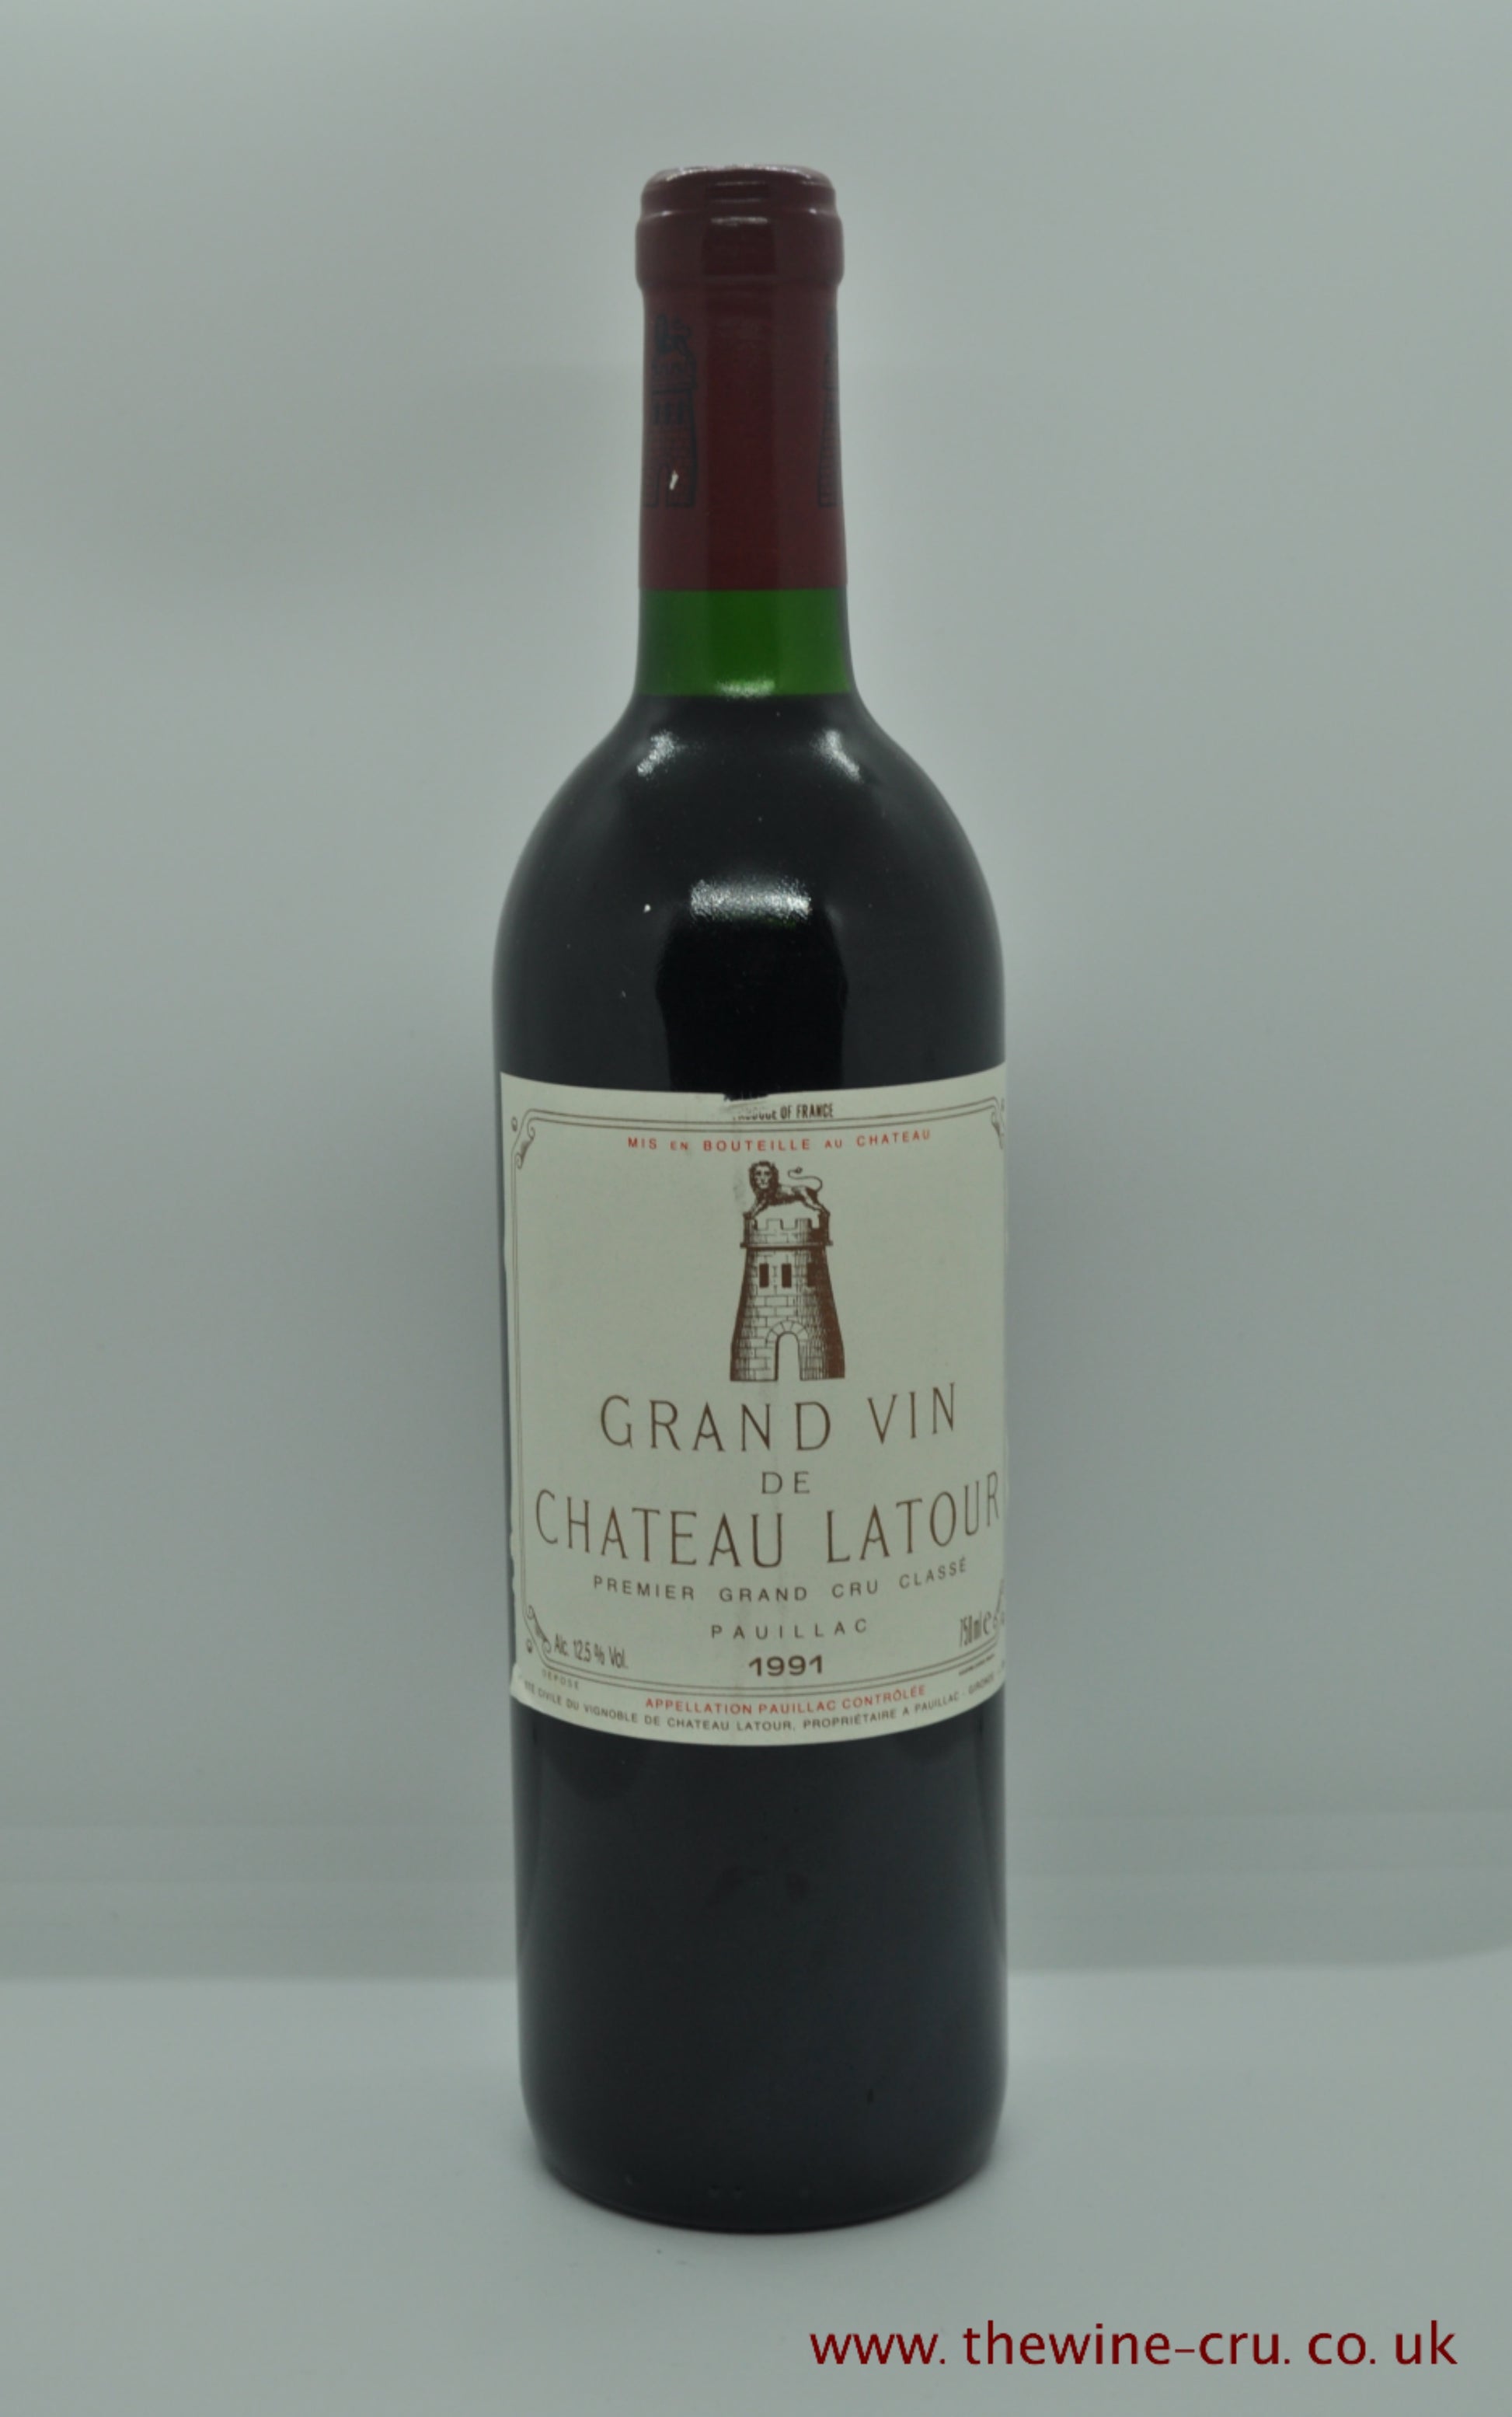 1991 vintage red wine. Chateau Latour 1991. France, Bordeaux. Immediate delivery UK. Free local delivery.